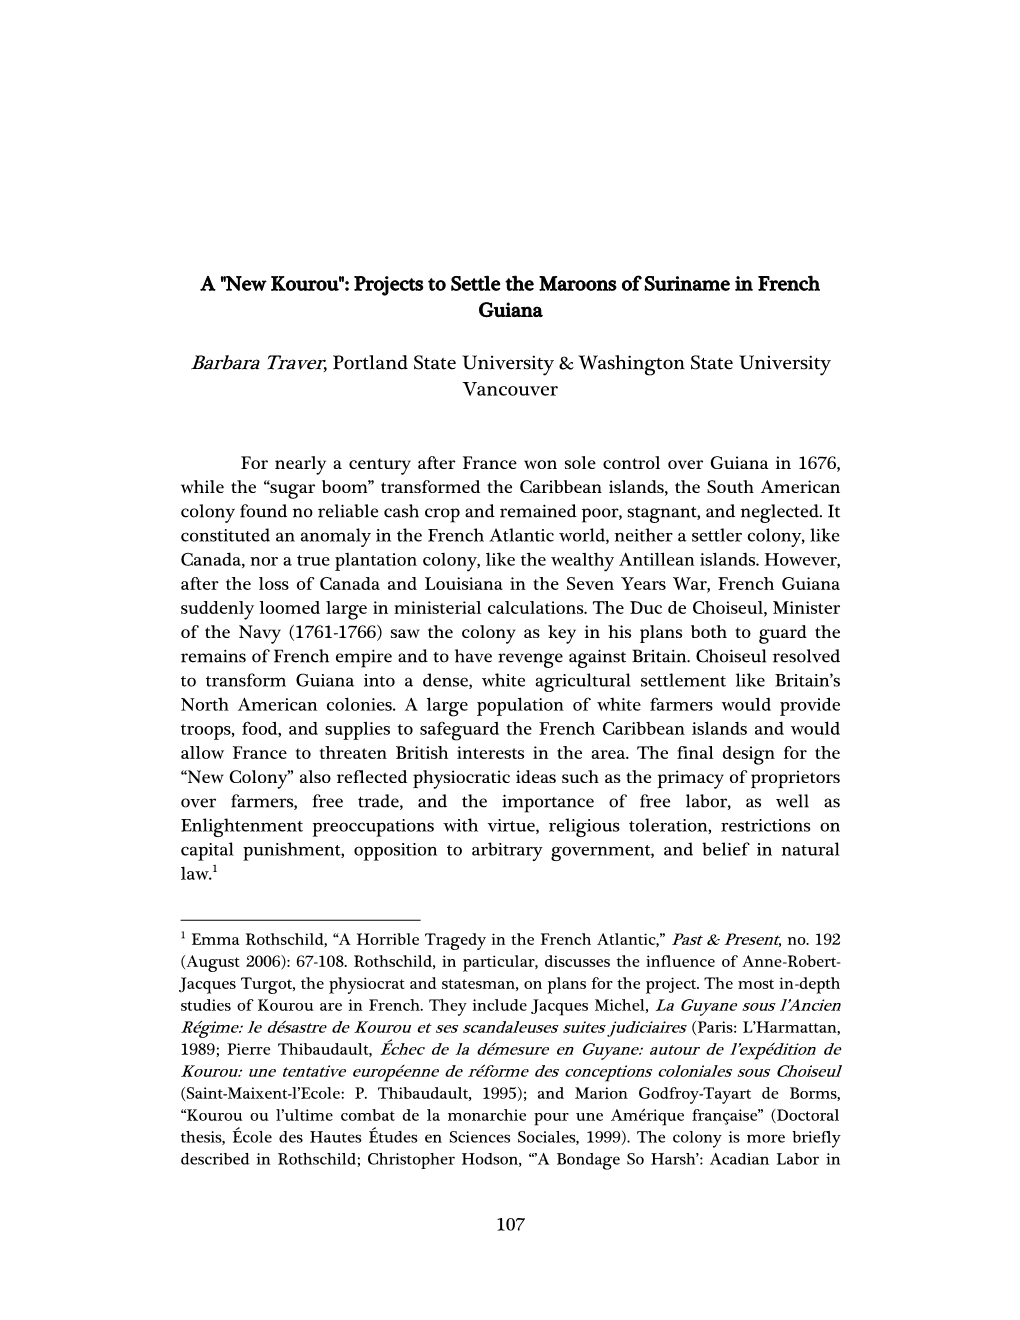 A "New Kourou": Projects to Settle the Maroons of Suriname in French Guiana Barbara Traver, Portland State University